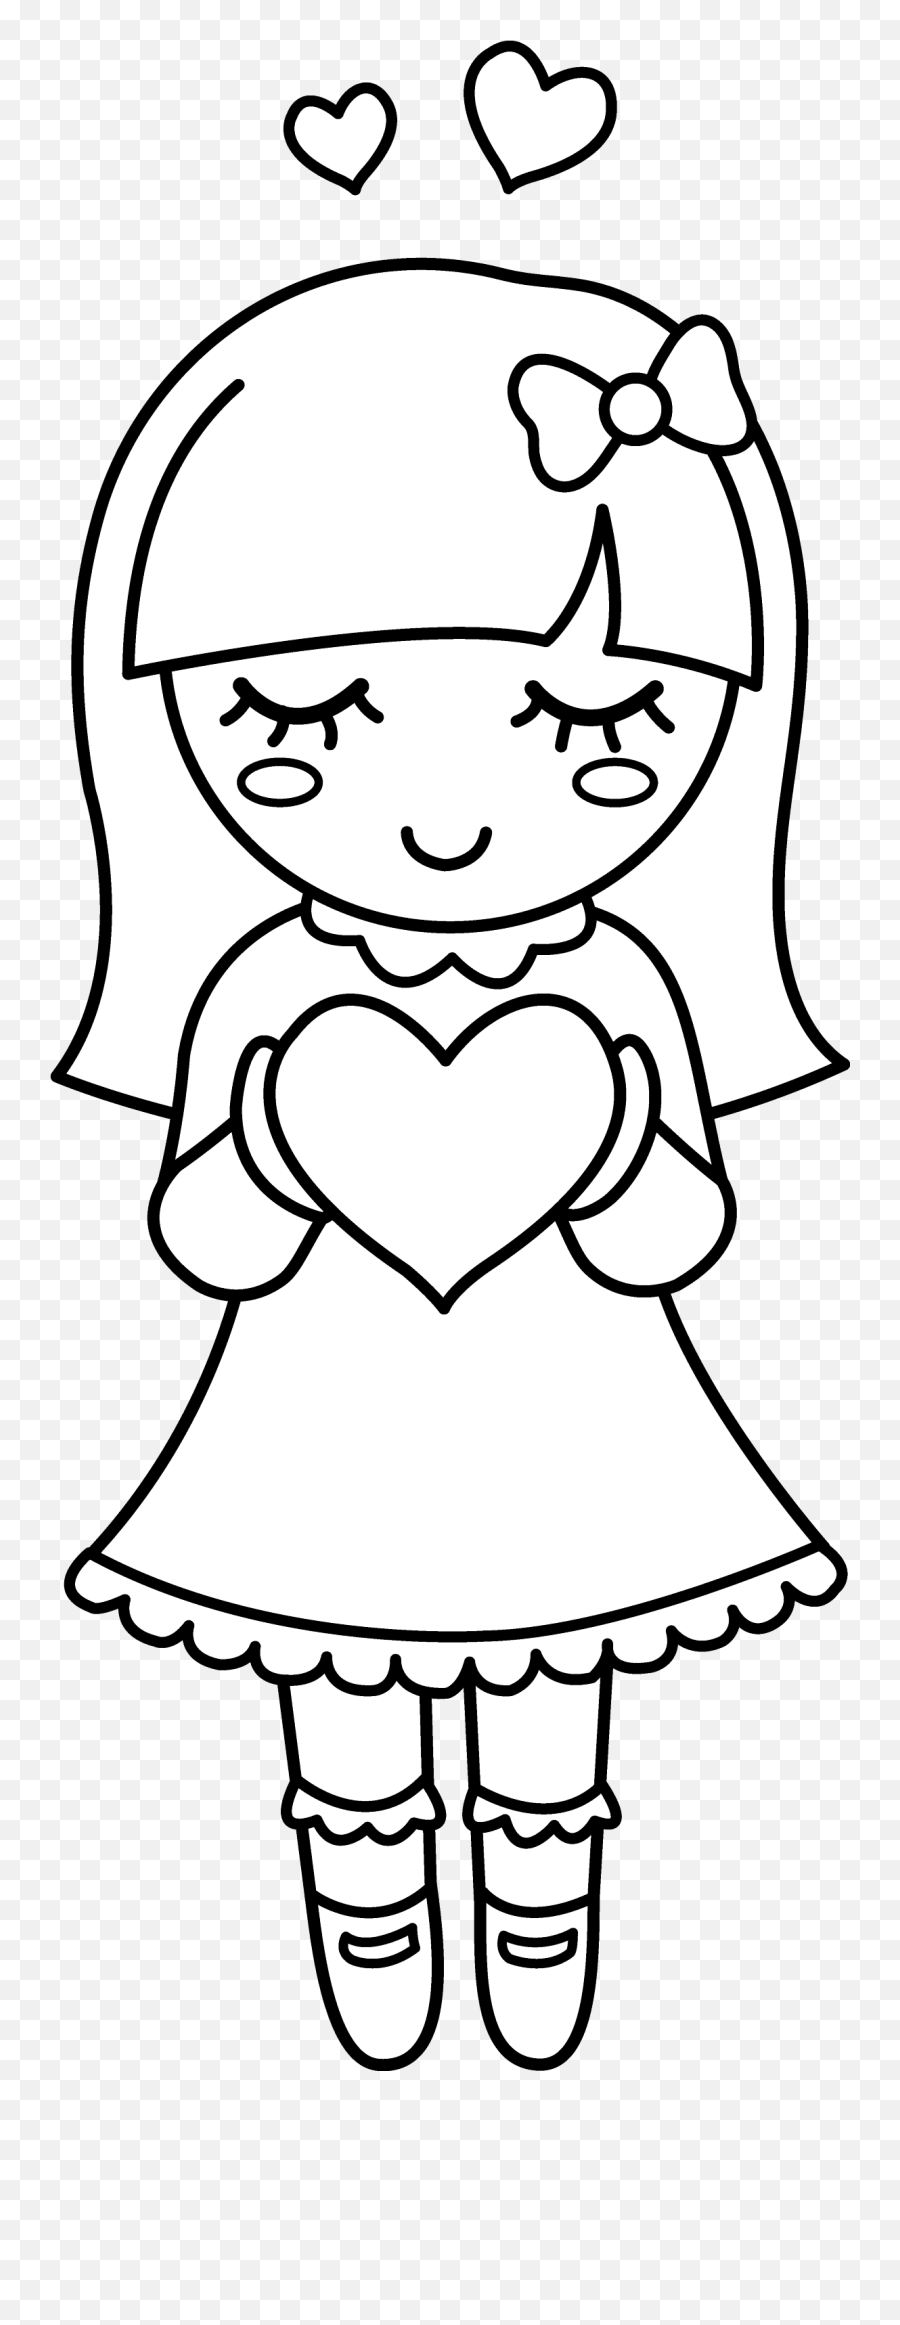 Valentines Day Clip Art Coloring Pages Quotes Emoji,Christian Valentine Clipart